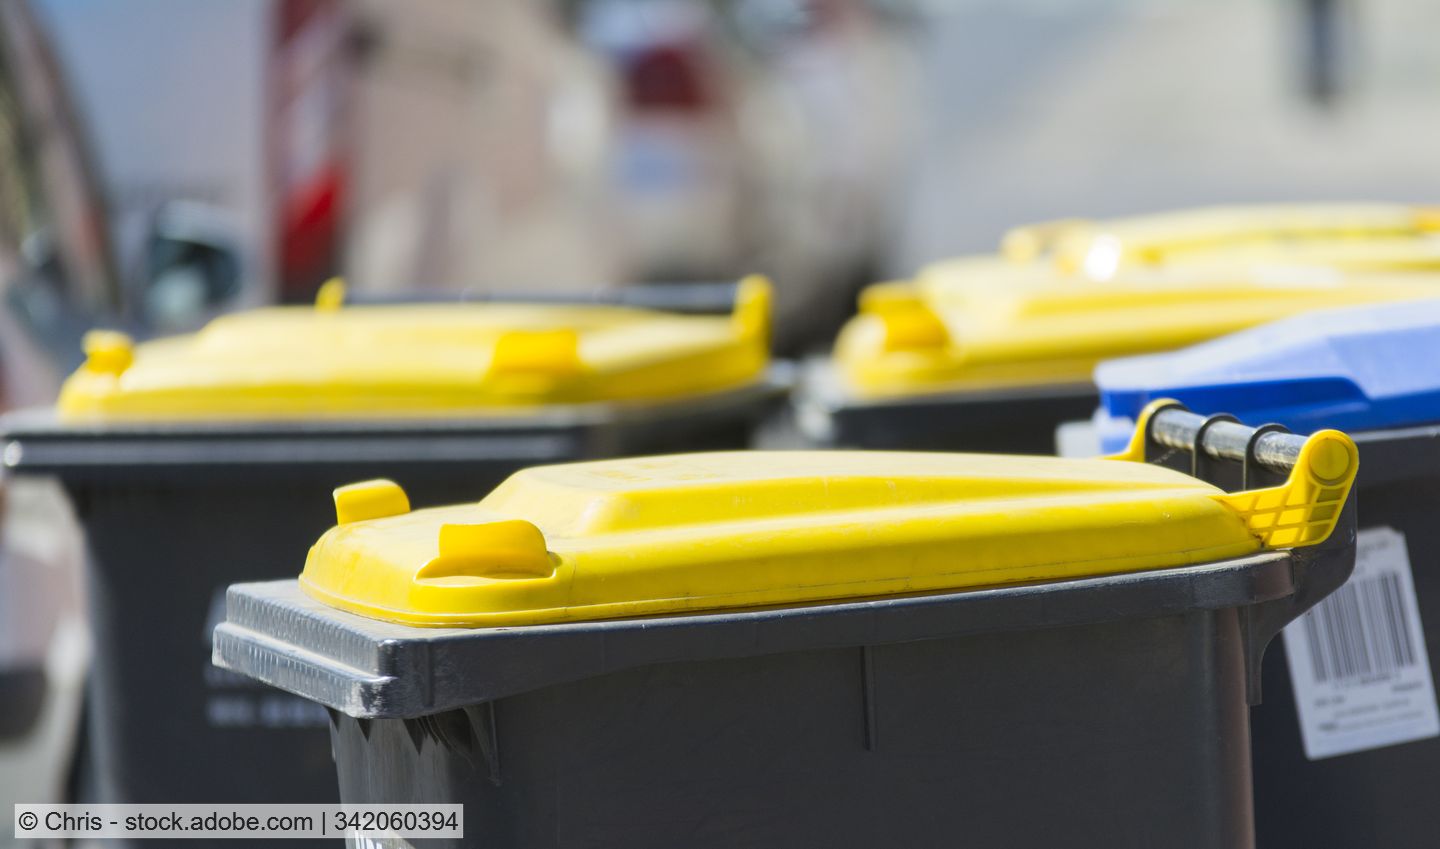 Several packaging waste bins with yellow lids